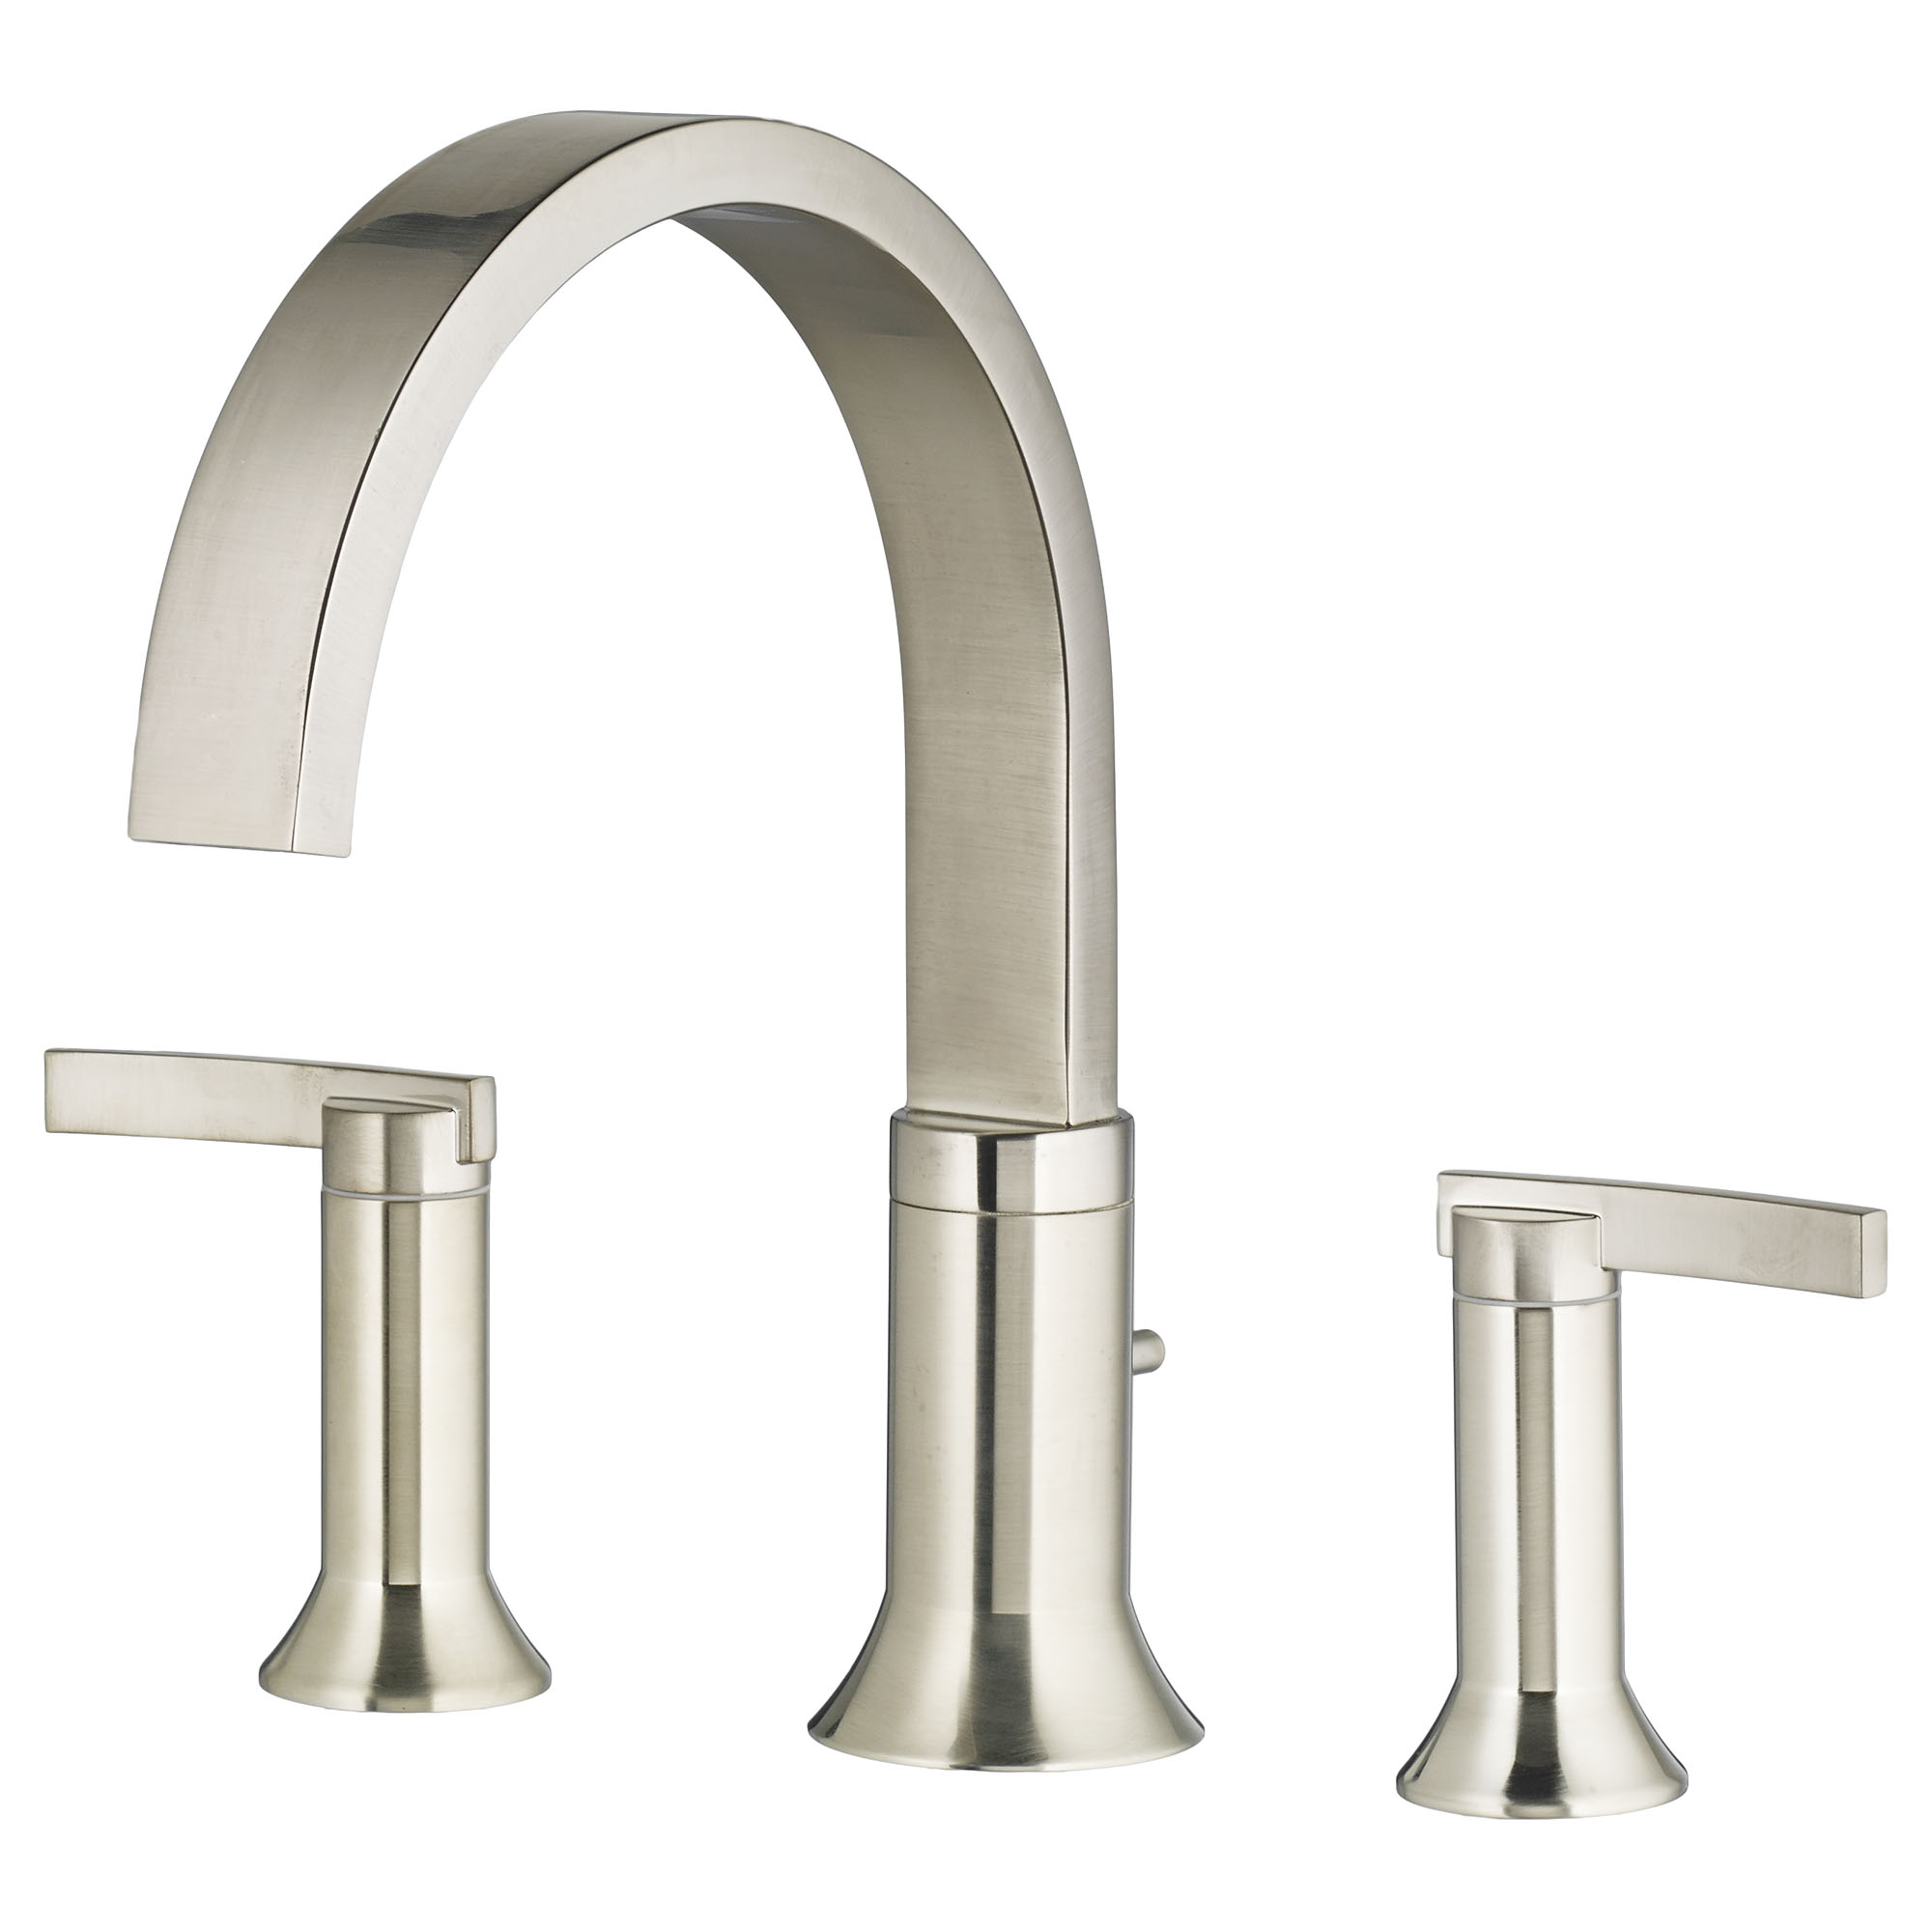 Berwick Deck-Mount Bathtub Faucet for Flash Rough-in Valve with Lever Handles